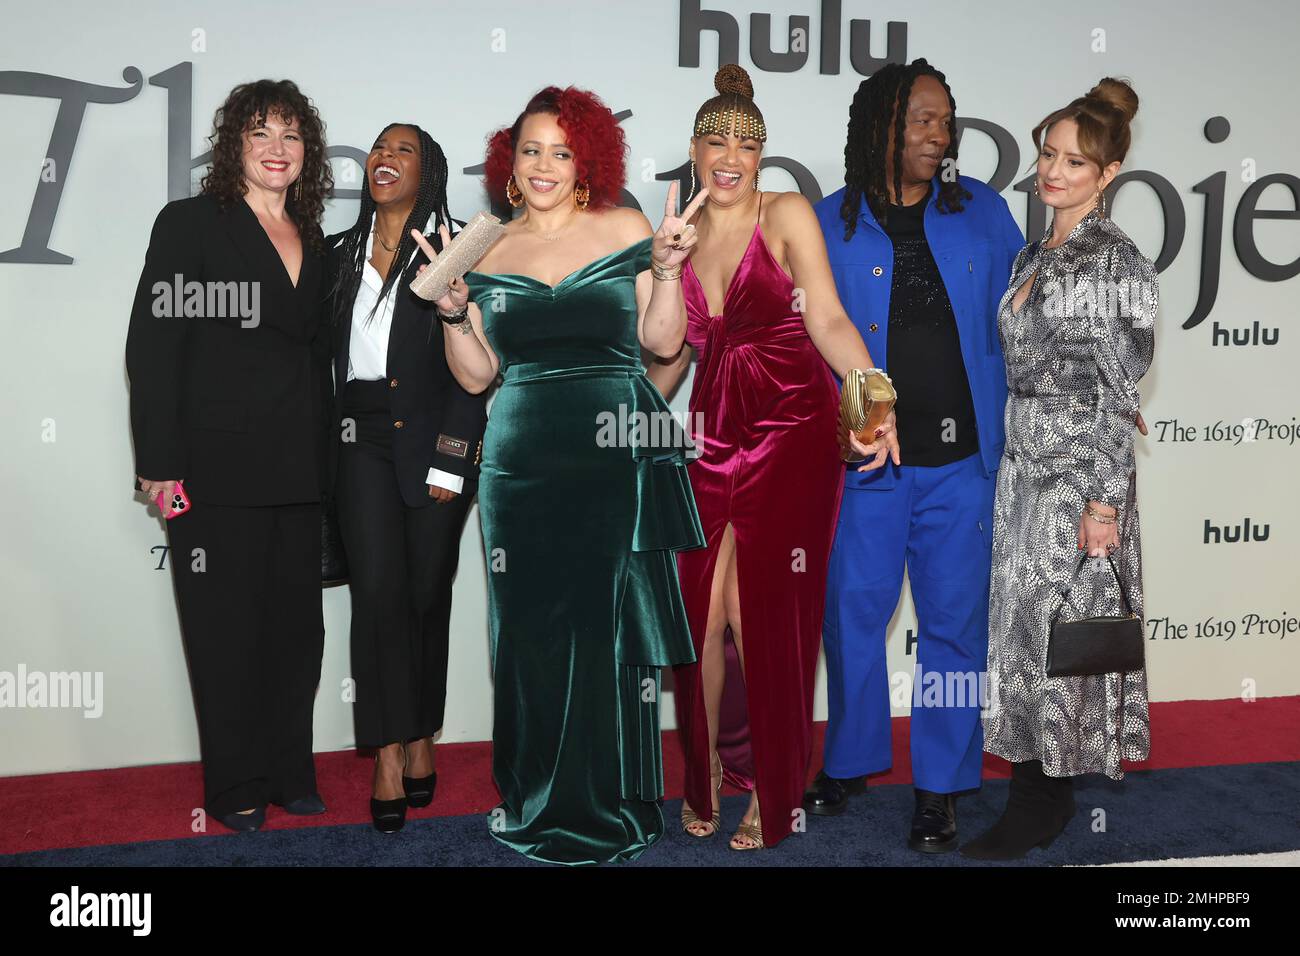 Los Angeles, Ca. 26th Jan, 2023. Caitlin Roper, T ara Duncan, Nikole Hannah-Jones, Shoshana Guy, Roger Ross Williams, Kathleen Lingo at the premiere of Hulu's The 1619 Project at the Academy Museum of Motion Pictures in Los Angeles, California on January 26, 2023. Credit: Faye Sadou/Media Punch/Alamy Live News Stock Photo